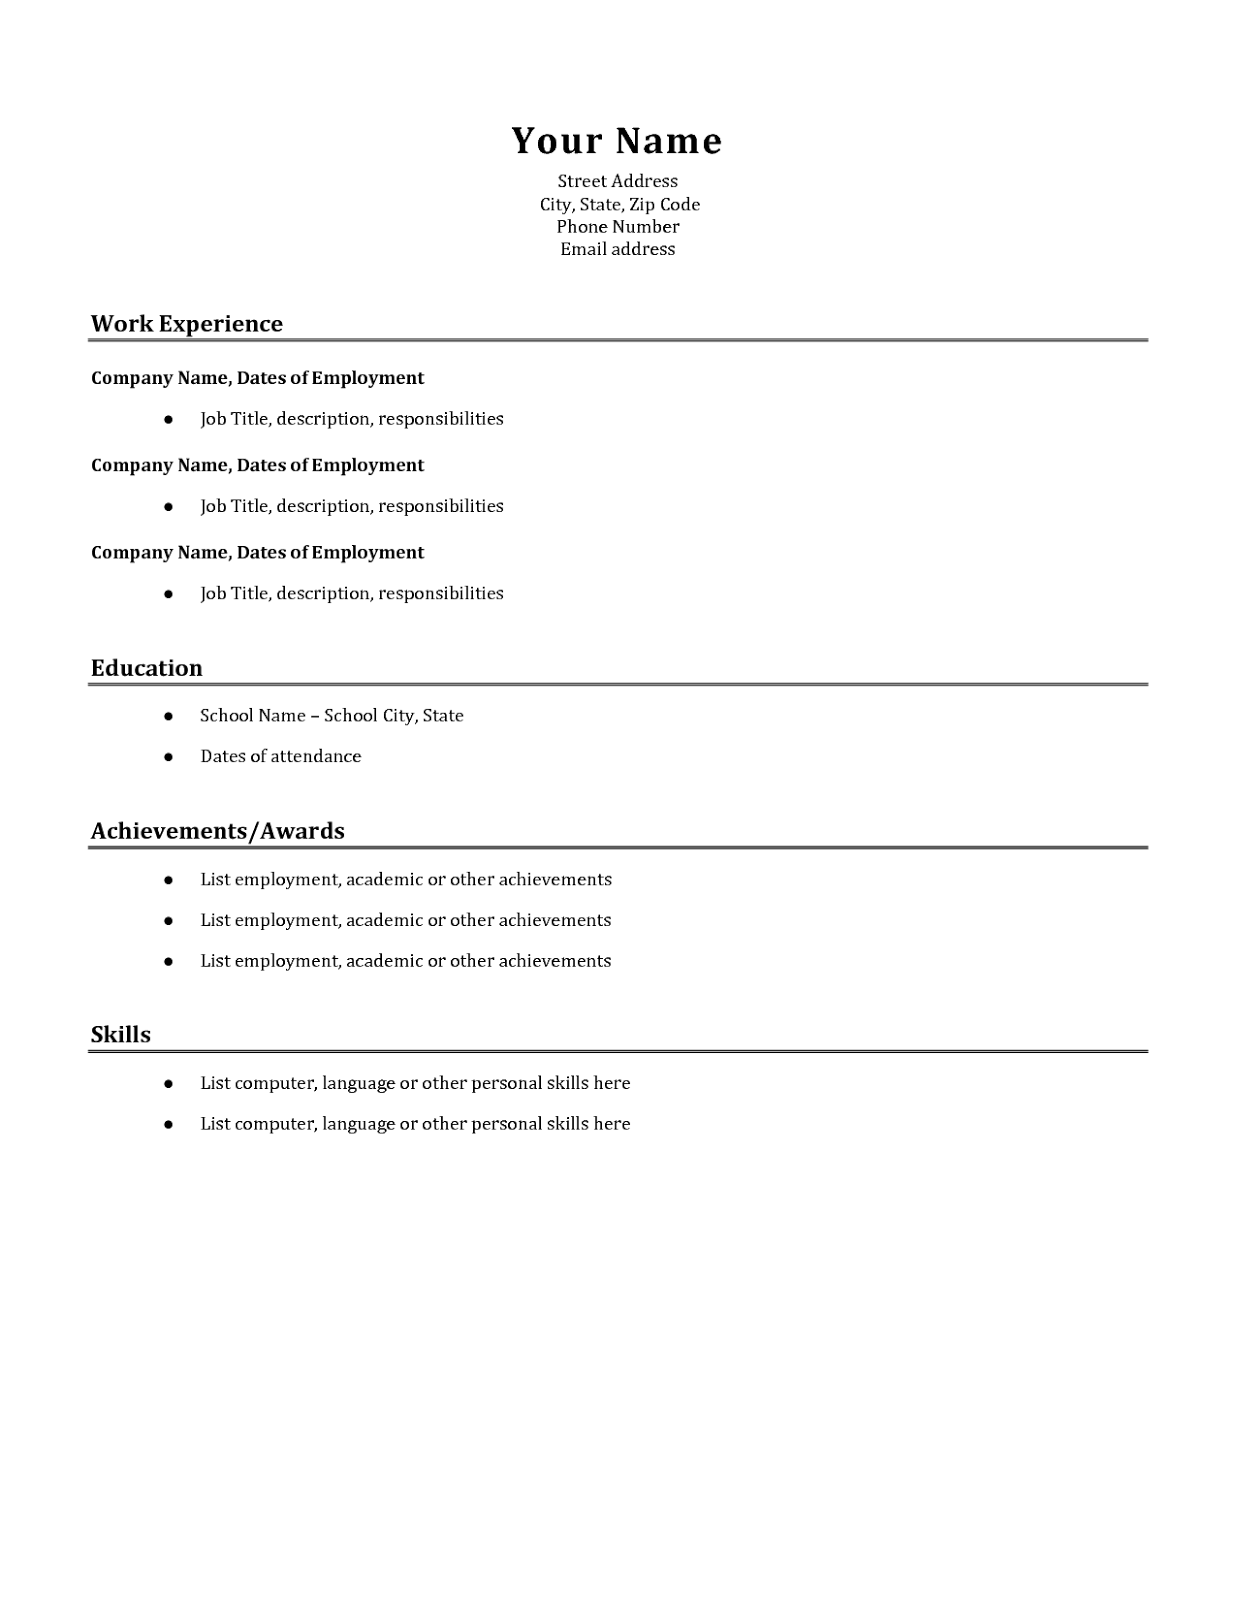 Simple resume for jobs examples